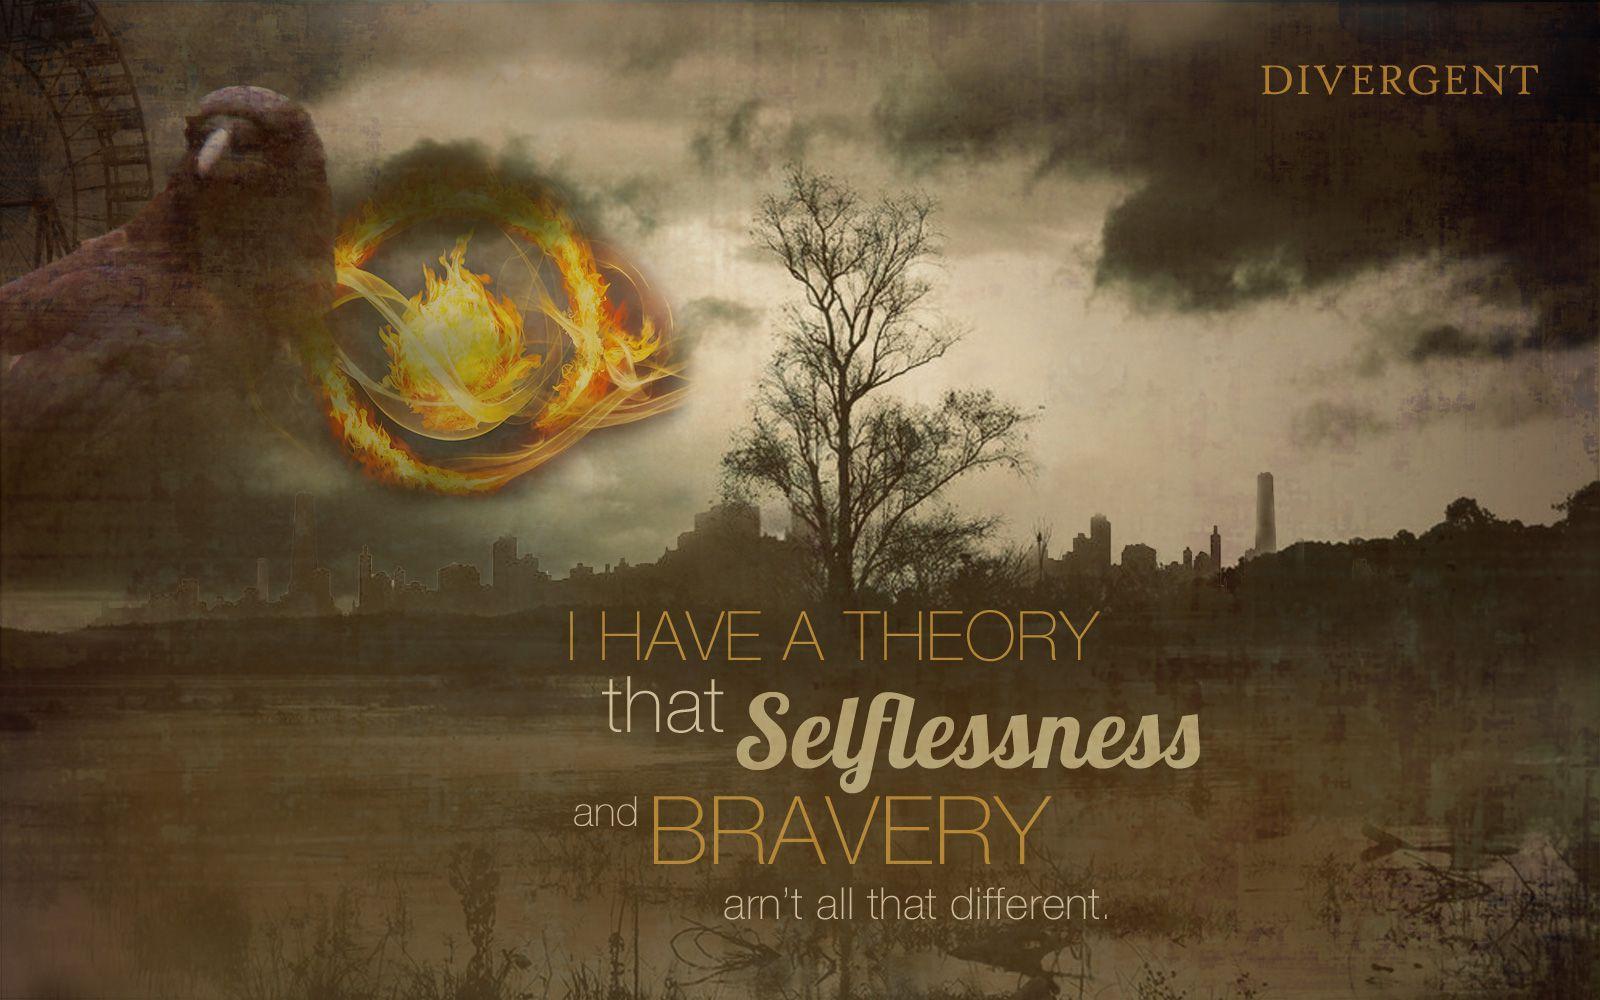 Divergent Series image Divergent Quotes HD wallpaper and background